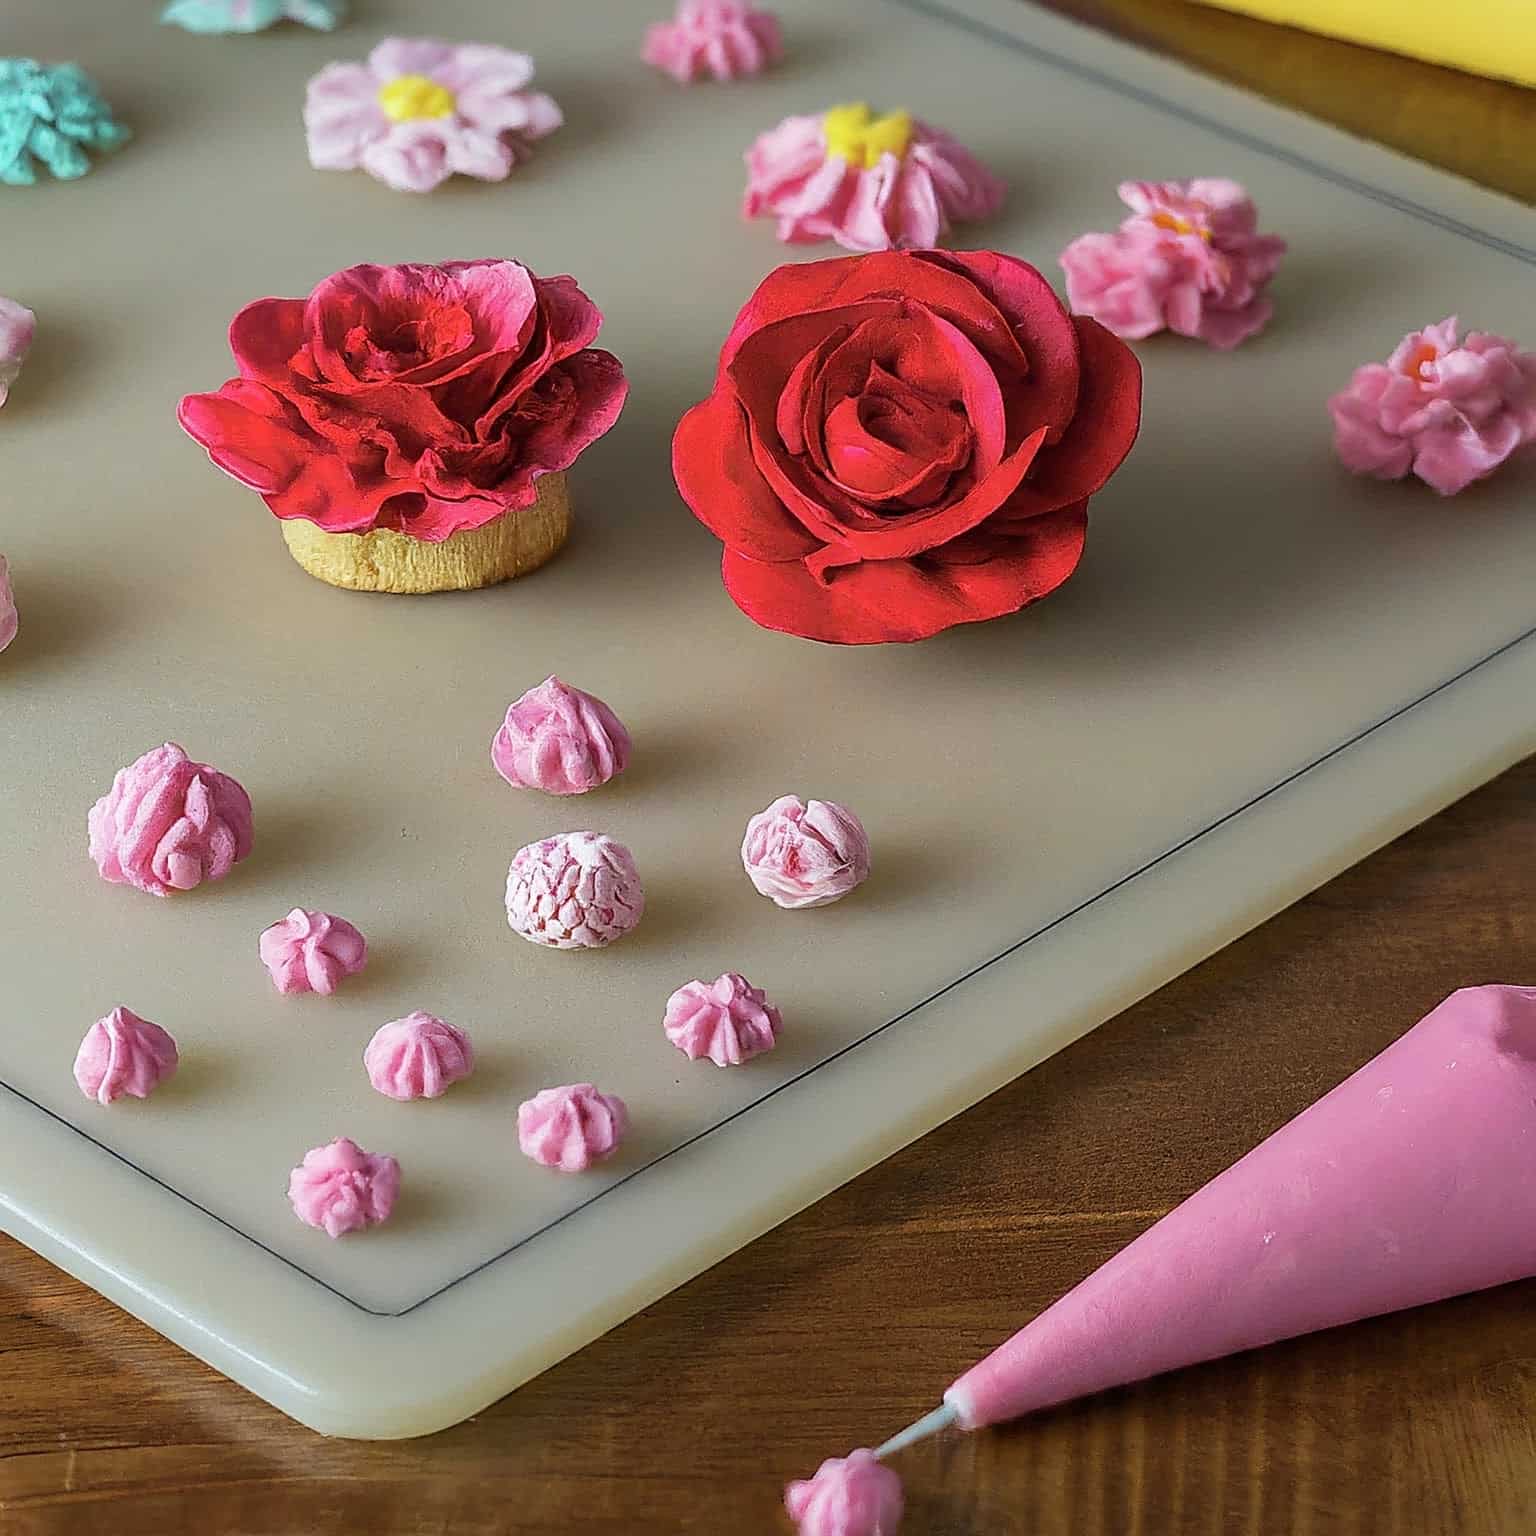 Royal Icing Flowers on a table